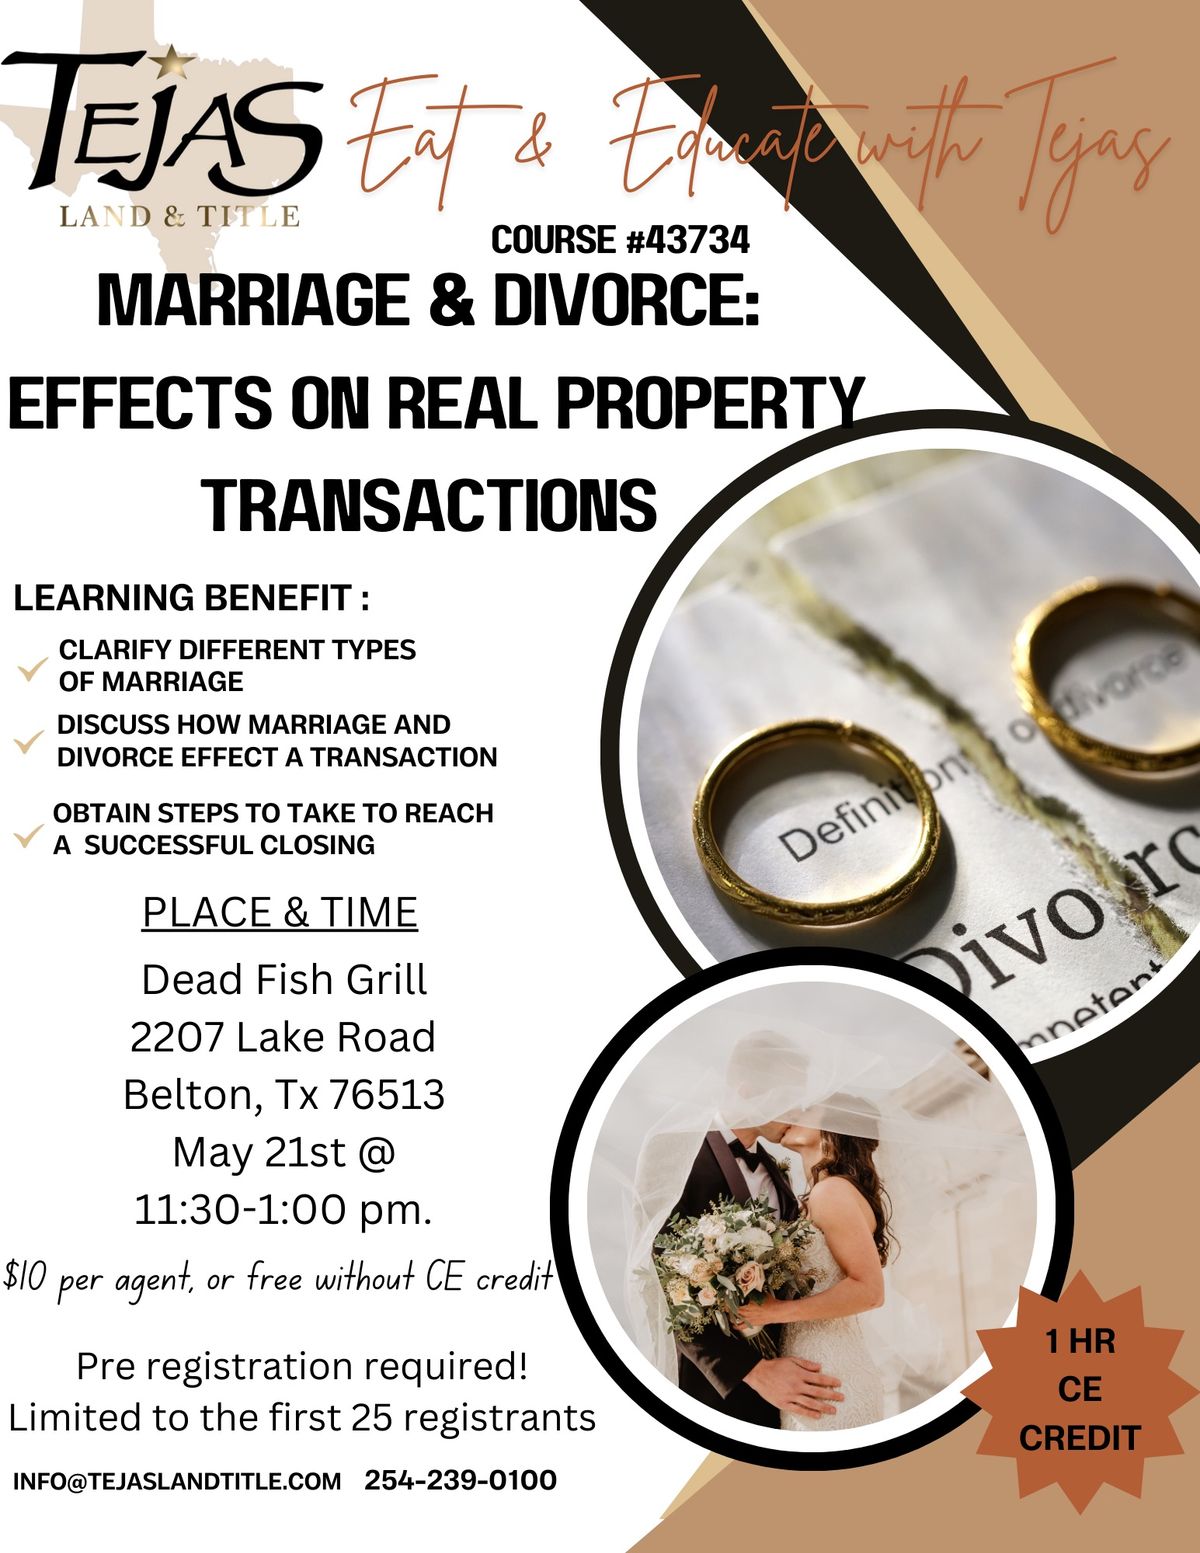 Eat & Educate with Tejas: Marriage & Divorce Effects on Real Property Transactions